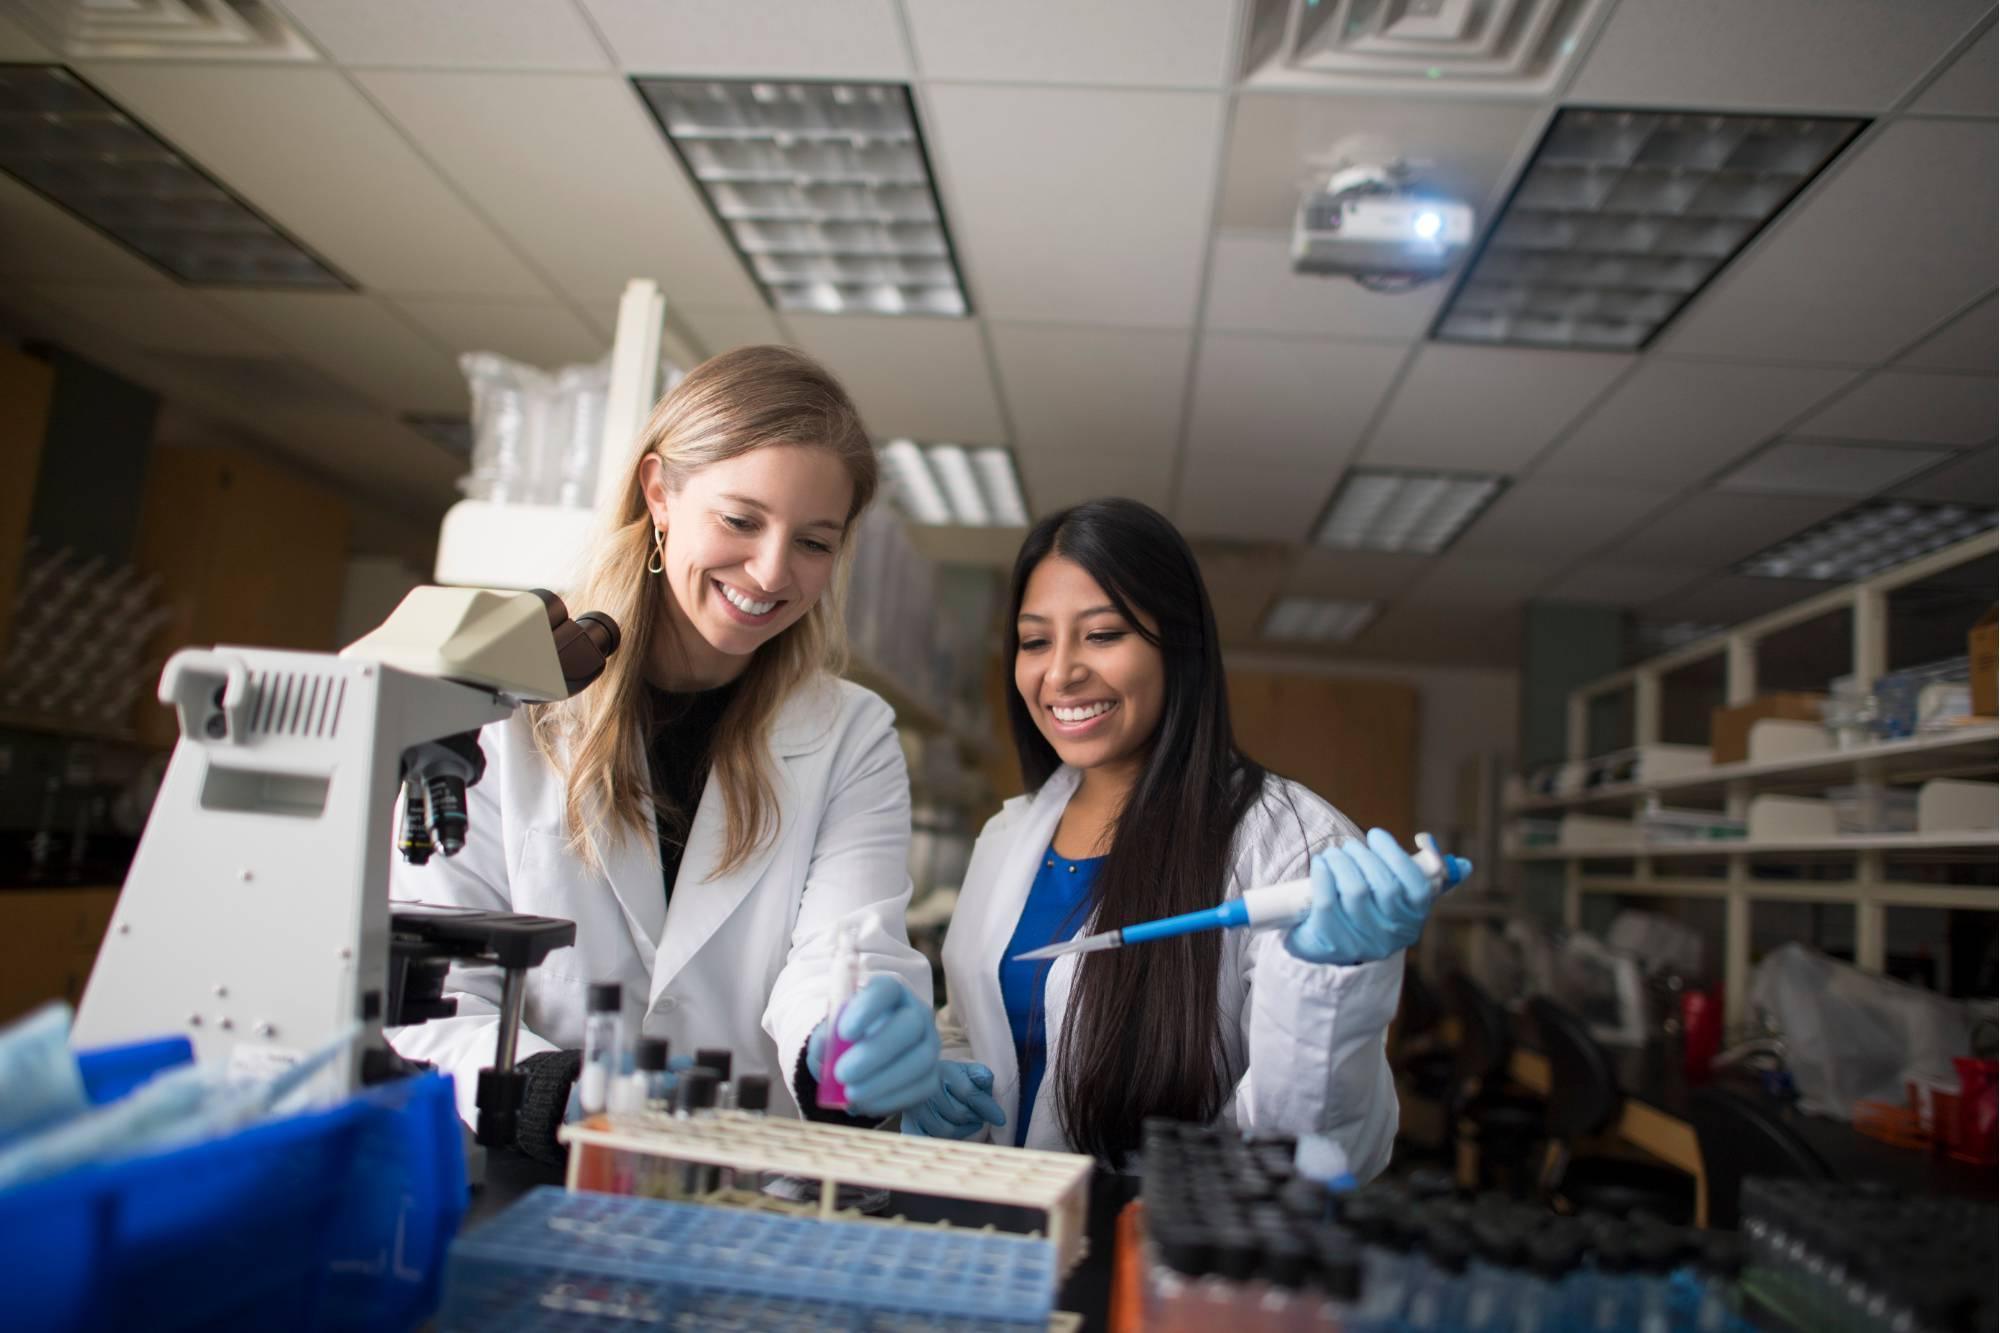 A GVSU student works with a faculty member in a lab.